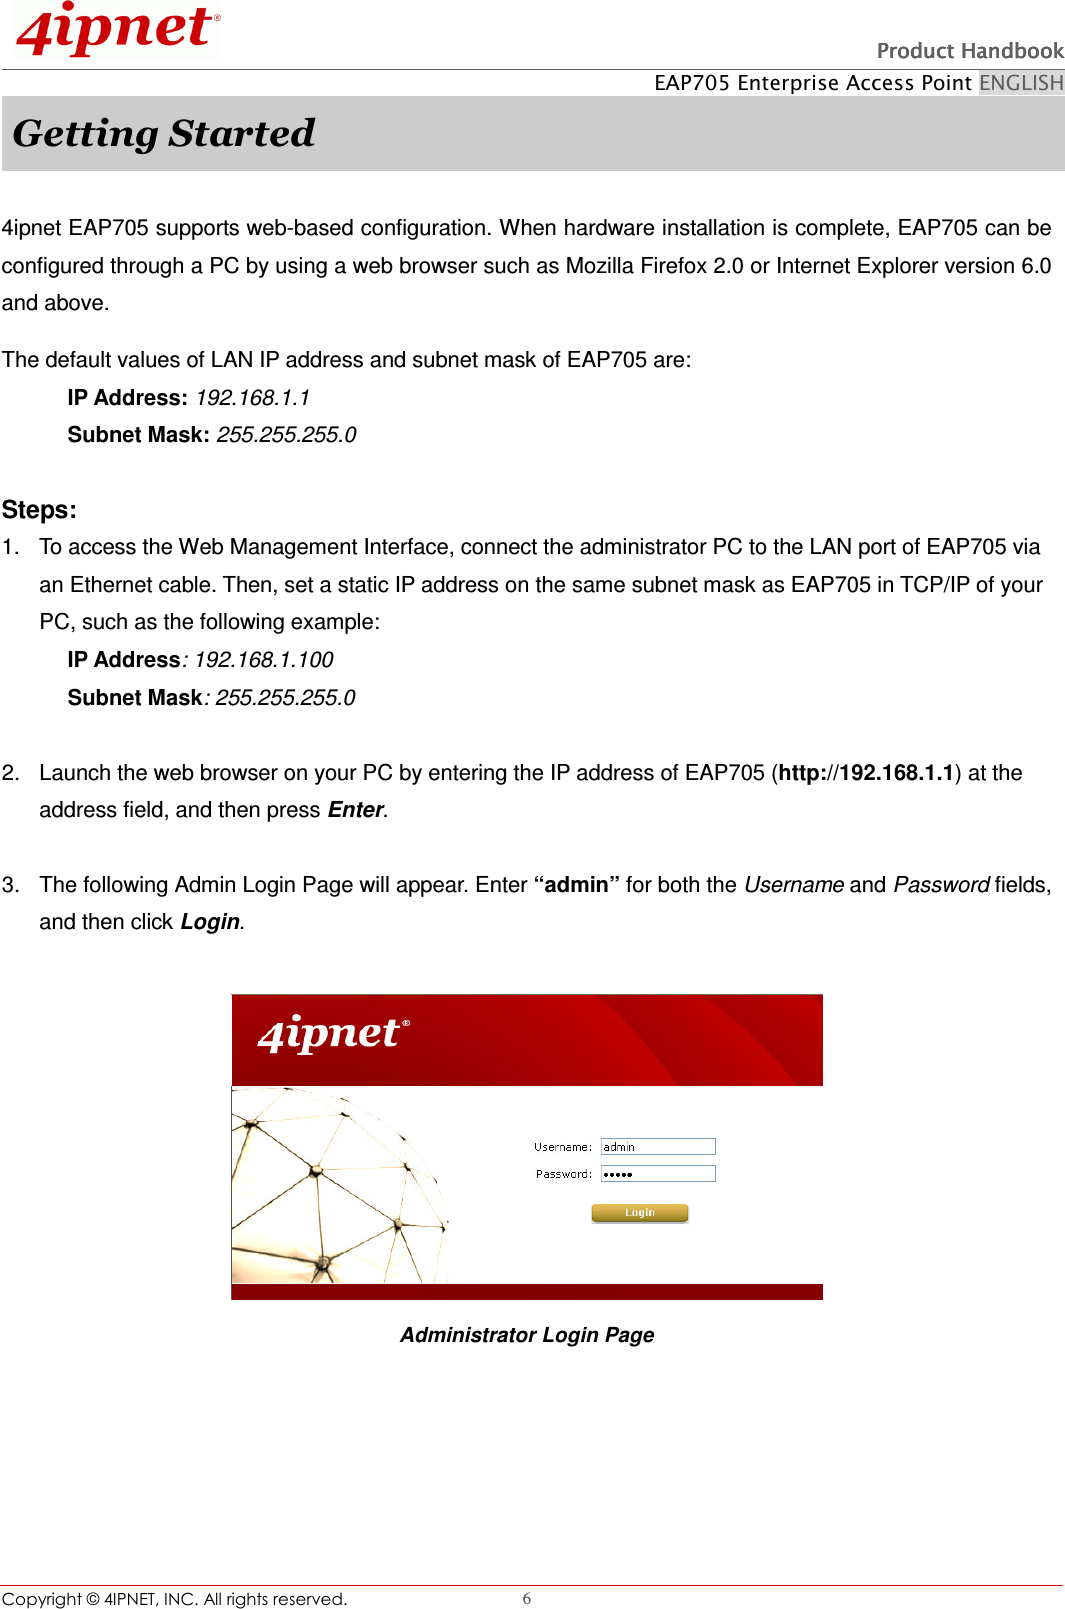   Product HandbookProduct HandbookProduct HandbookProduct Handbook    EAP705 Enterprise Access Point ENGLISH Copyright © 4IPNET, INC. All rights reserved.                                                              6 Getting Started  4ipnet EAP705 supports web-based configuration. When hardware installation is complete, EAP705 can be configured through a PC by using a web browser such as Mozilla Firefox 2.0 or Internet Explorer version 6.0 and above. The default values of LAN IP address and subnet mask of EAP705 are: IP Address: 192.168.1.1 Subnet Mask: 255.255.255.0    Steps: 1.  To access the Web Management Interface, connect the administrator PC to the LAN port of EAP705 via an Ethernet cable. Then, set a static IP address on the same subnet mask as EAP705 in TCP/IP of your PC, such as the following example: IP Address: 192.168.1.100 Subnet Mask: 255.255.255.0    2.  Launch the web browser on your PC by entering the IP address of EAP705 (http://192.168.1.1) at the address field, and then press Enter.  3.  The following Admin Login Page will appear. Enter “admin” for both the Username and Password fields, and then click Login.   Administrator Login Page      